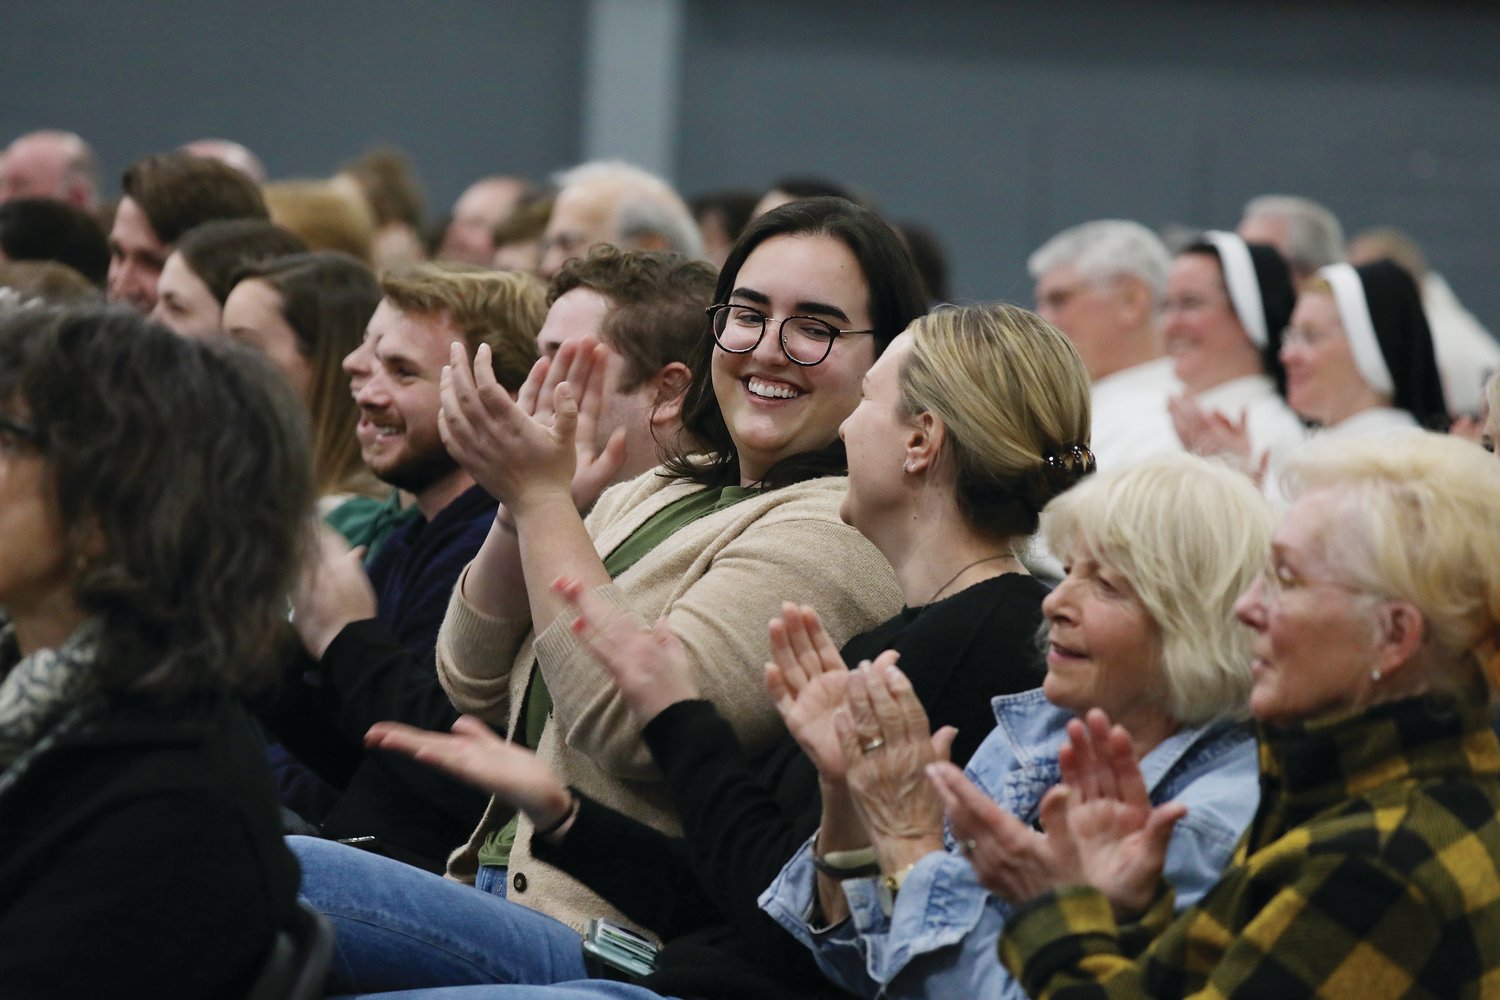 An Evening with The Hillbilly Thomists was held on Thursday, April 21, at Providence College as part of the continued celebration of the 150th anniversary of the Diocese of Providence.